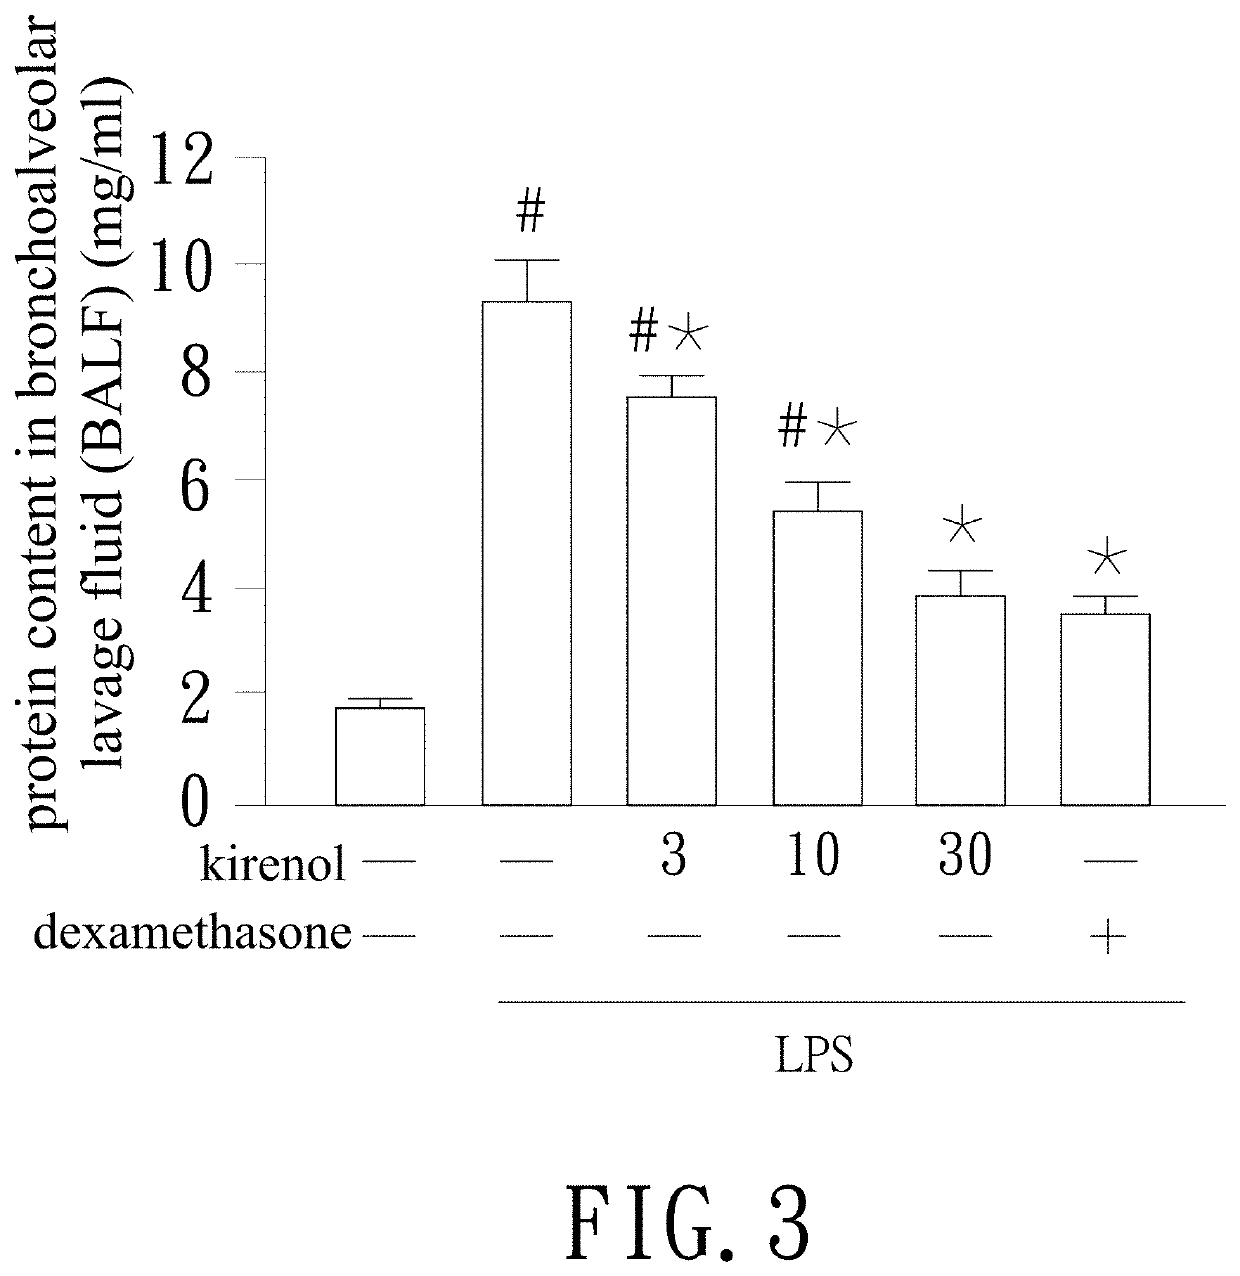 Method for treatment of acute lung injury by use of kirenol